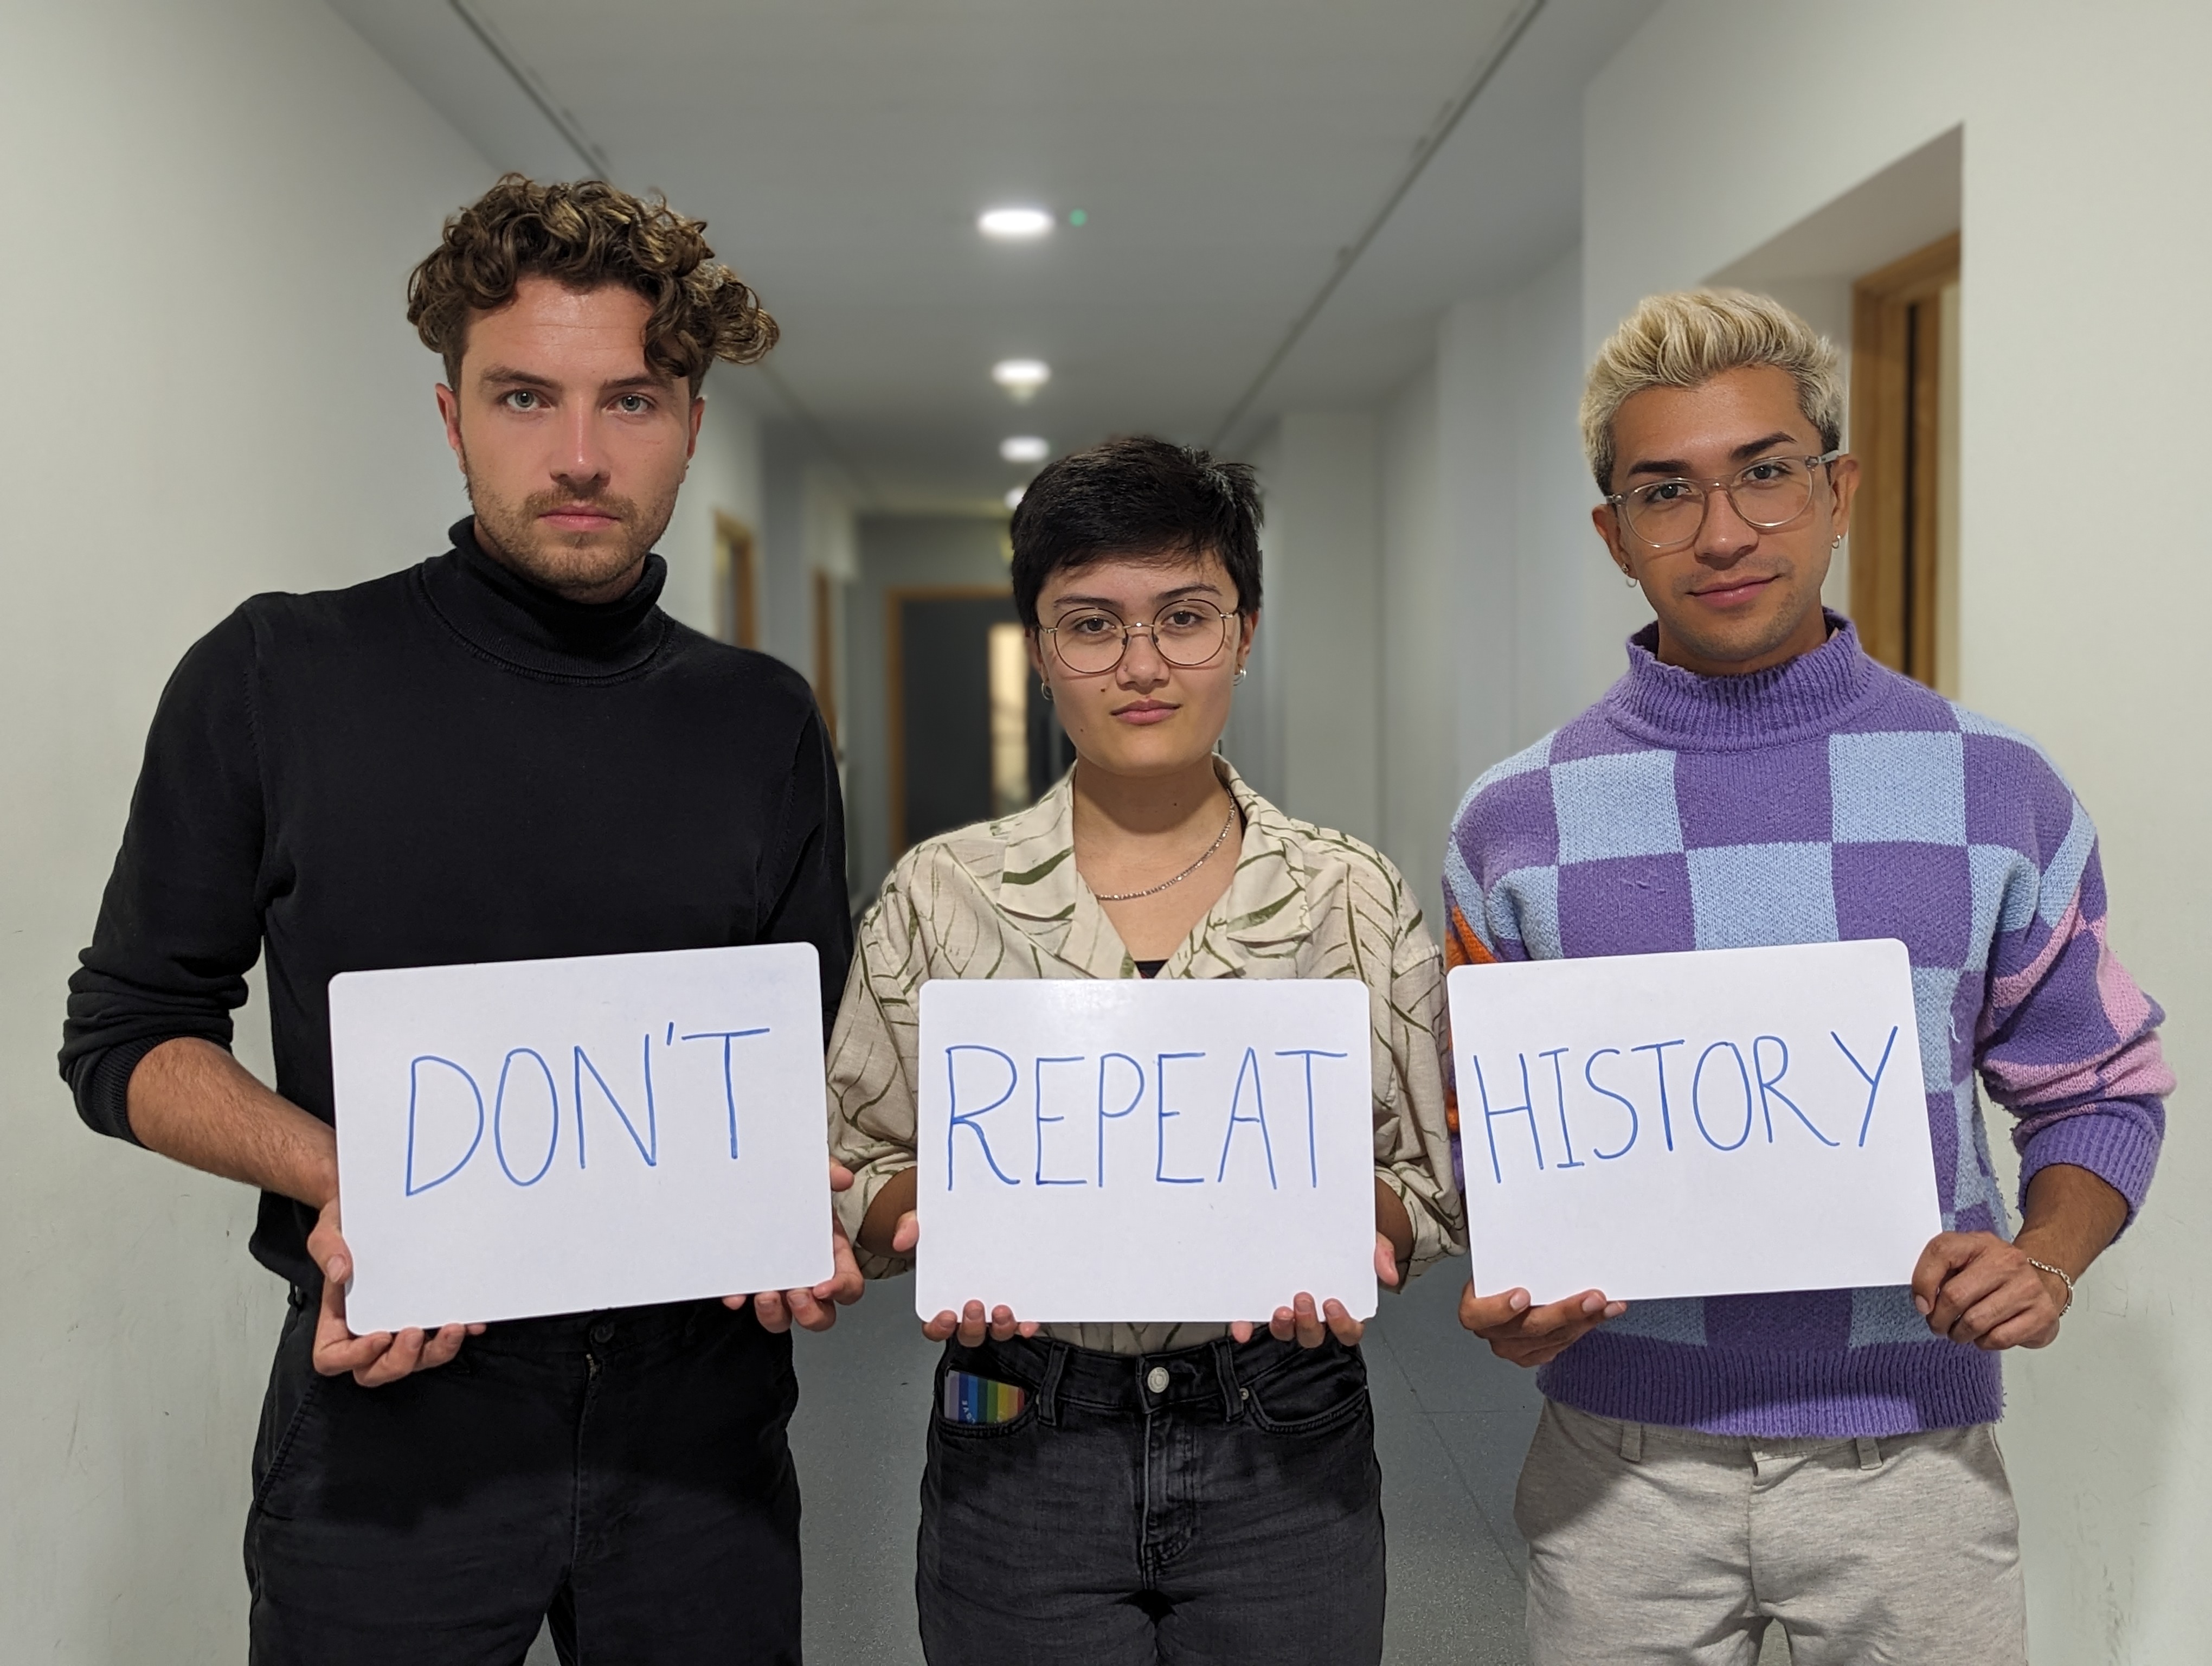 Three people holding whiteboards with a word written on each. 'Don't 'Repeat' 'History'